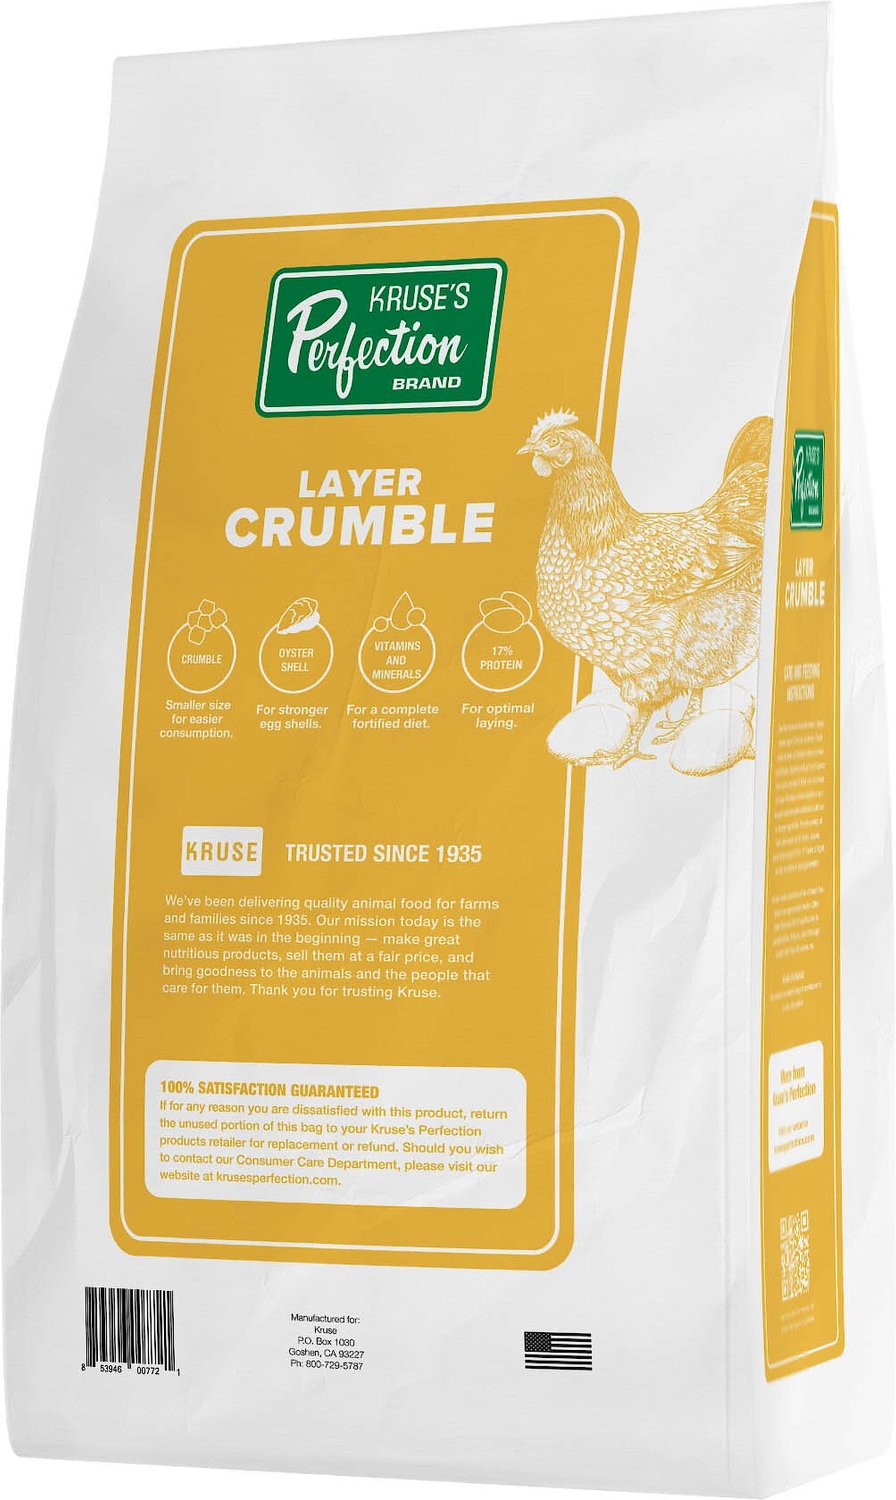 KRUSE'S PERFECTION BRAND Poultry Layer Crumble Chicken Feed, 12-lb bag ...